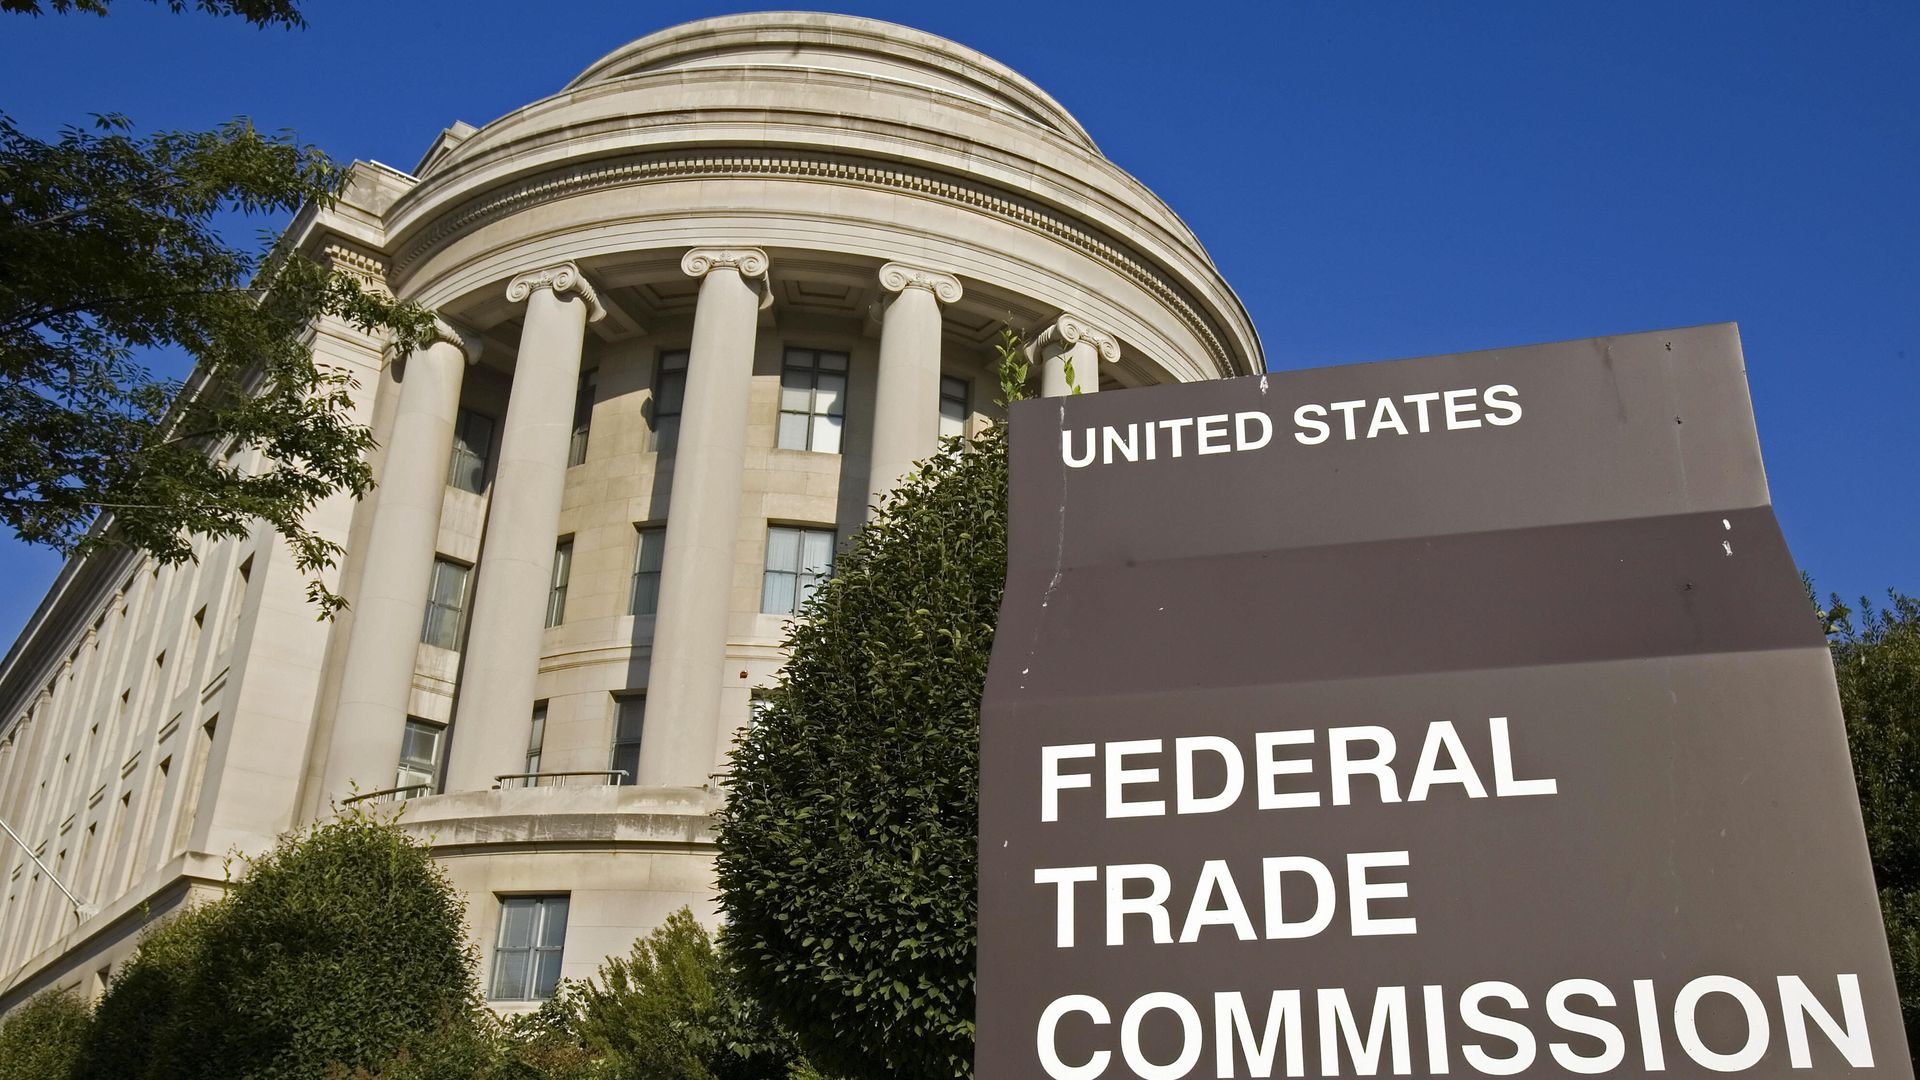 The Federal Trade Commission's building in Washington, DC, stands behind a sign for the agency